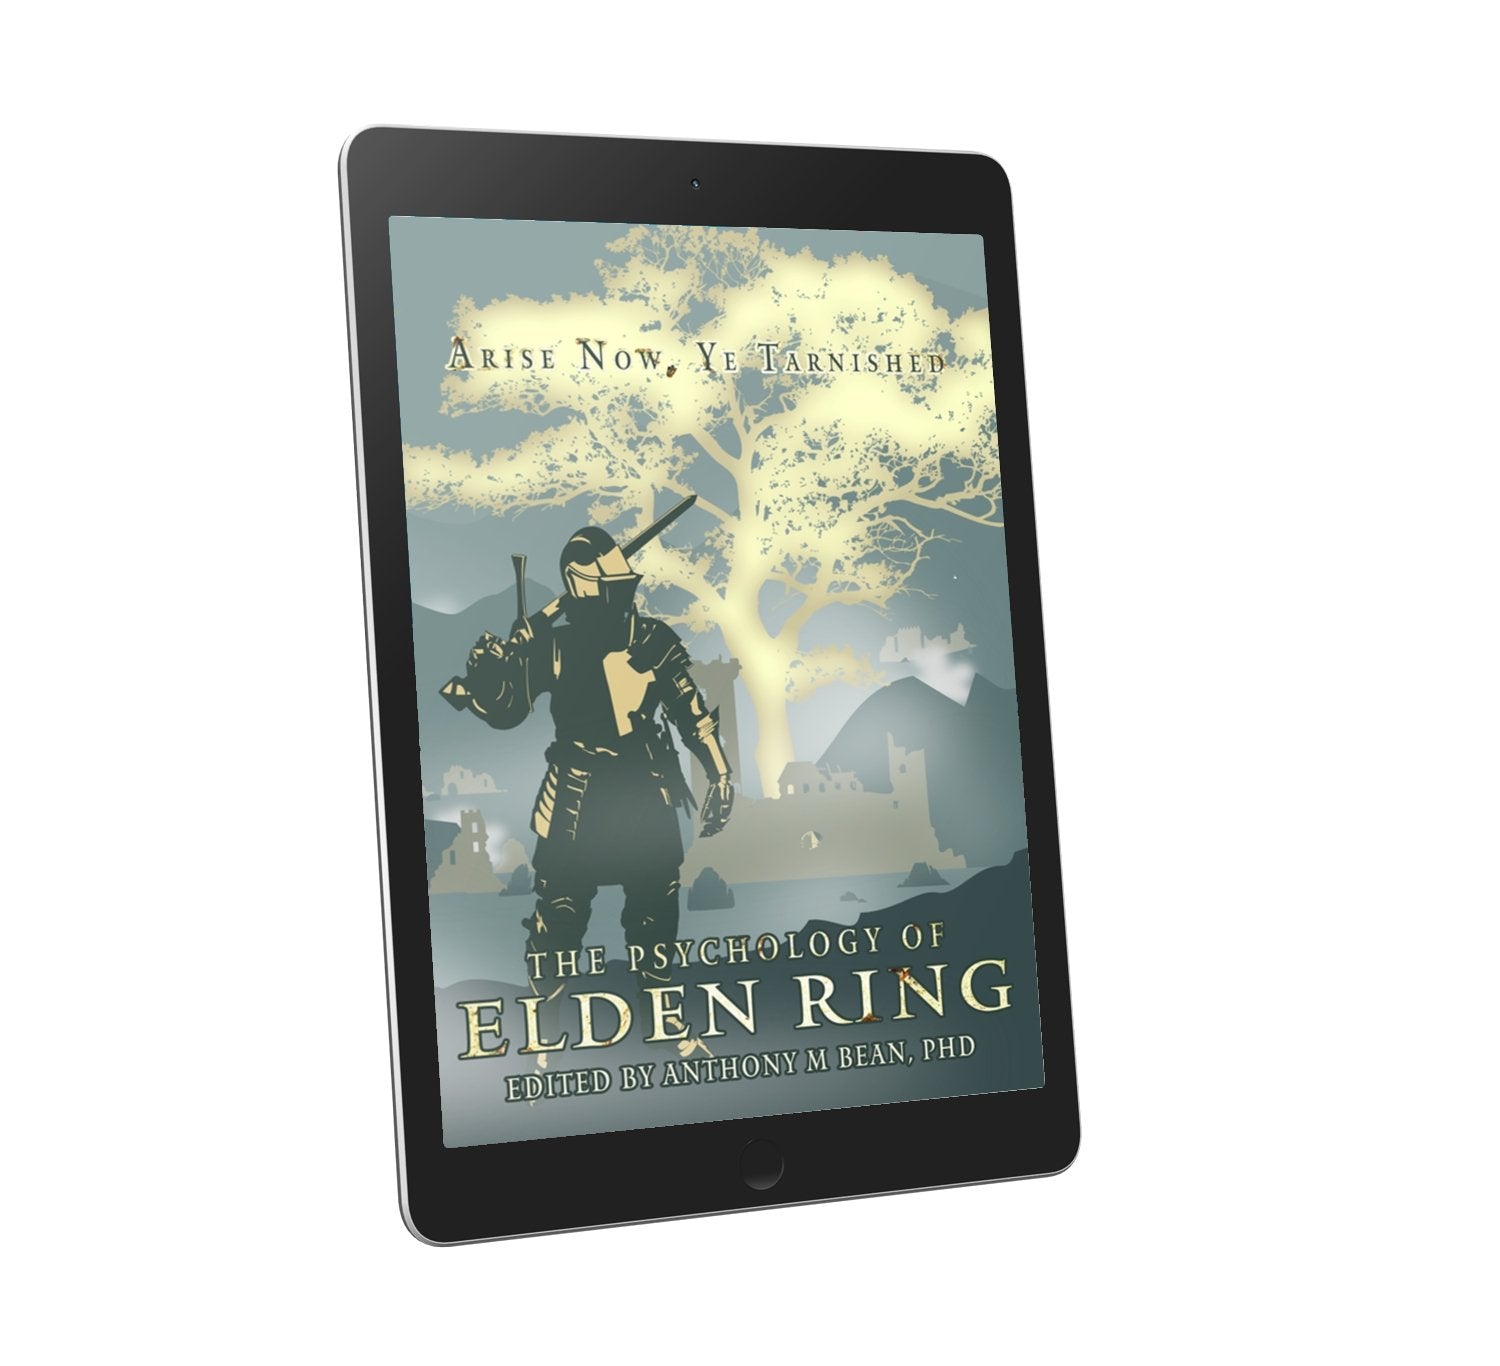 The Psychology of Elden Ring: Arise Now, Ye Tarnished